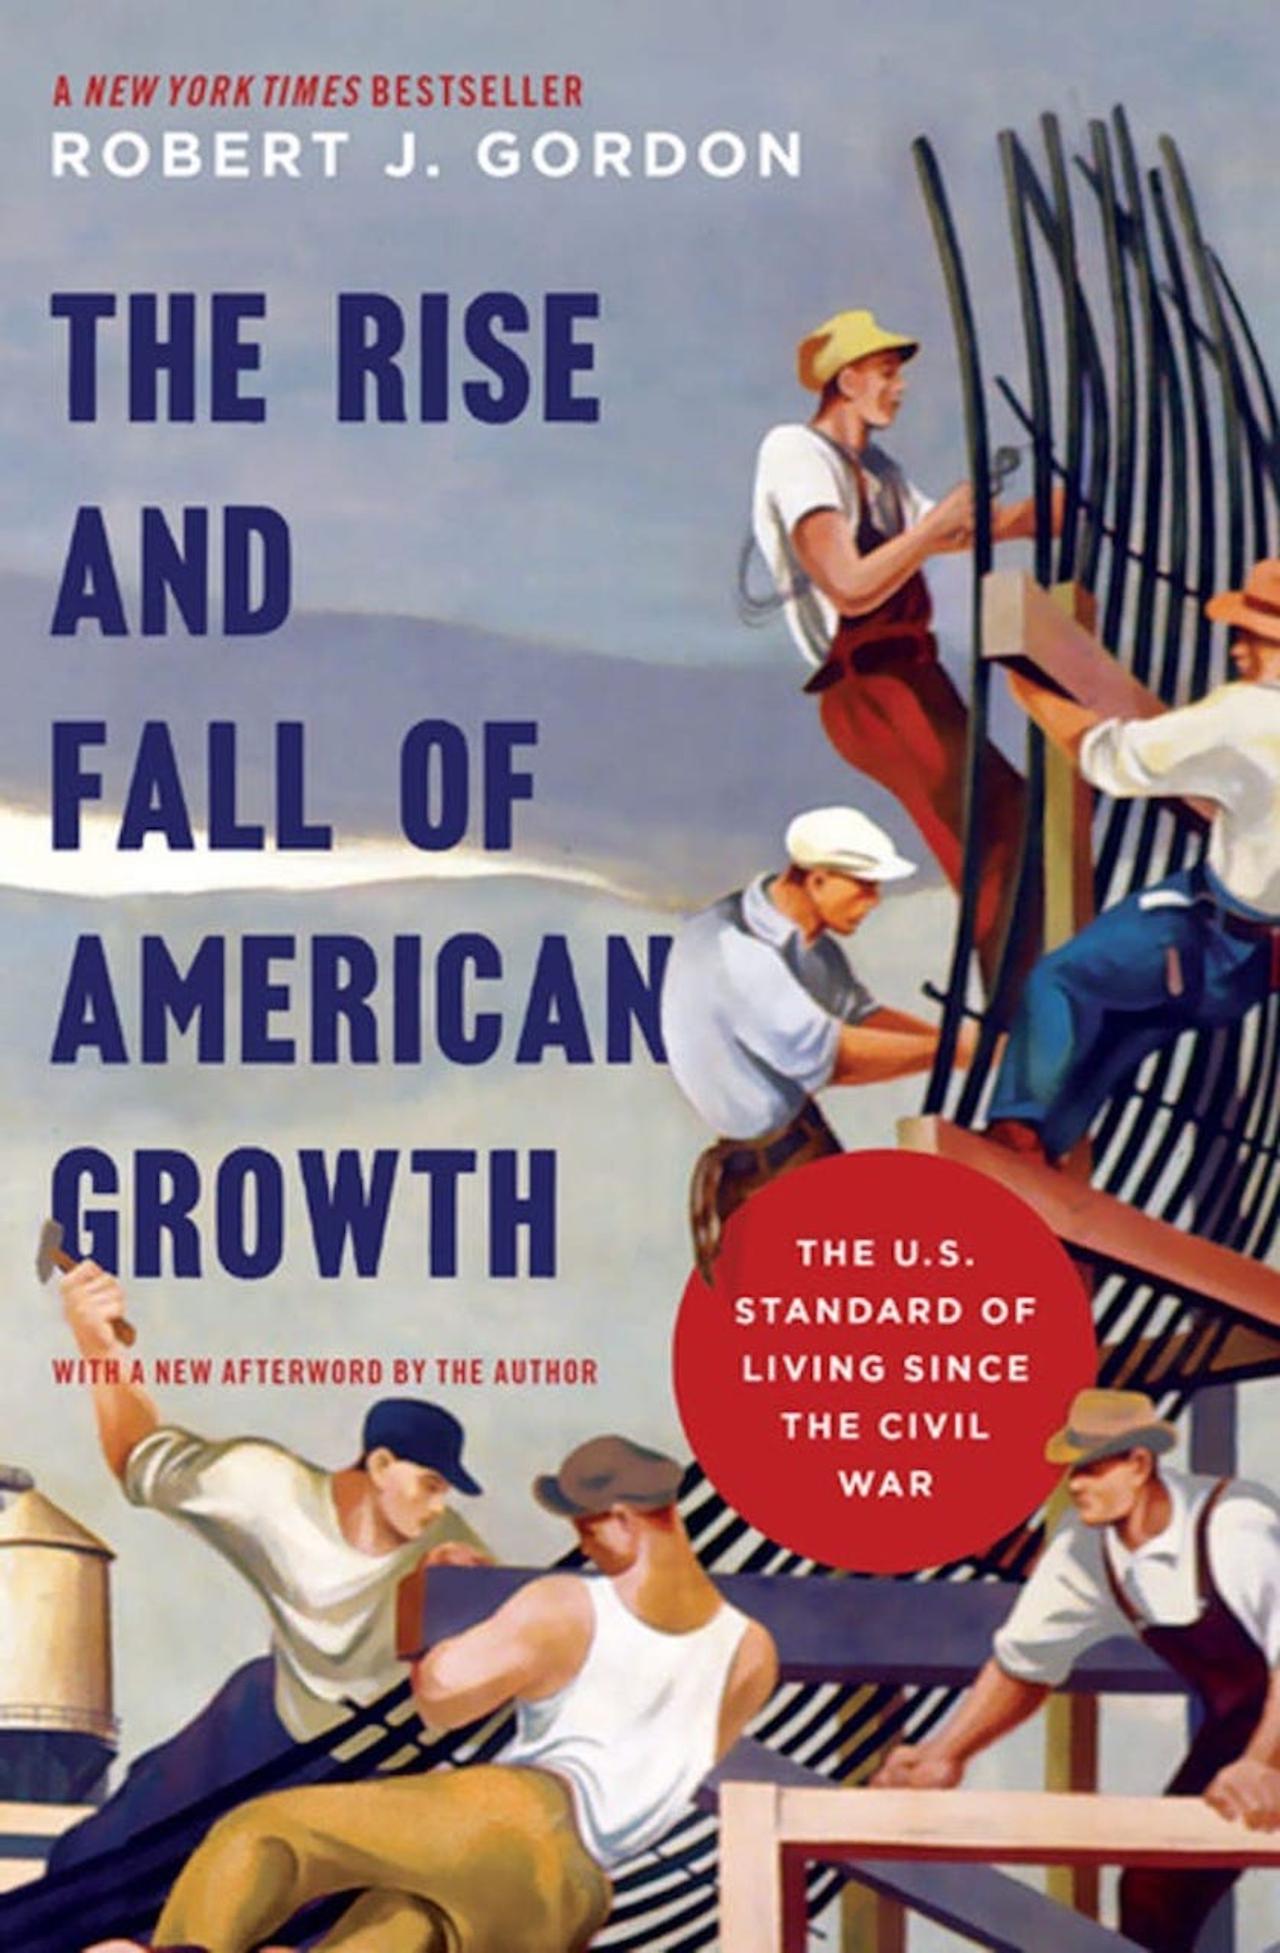 Robert J. Gordon, The Rise and Fall of American Growth